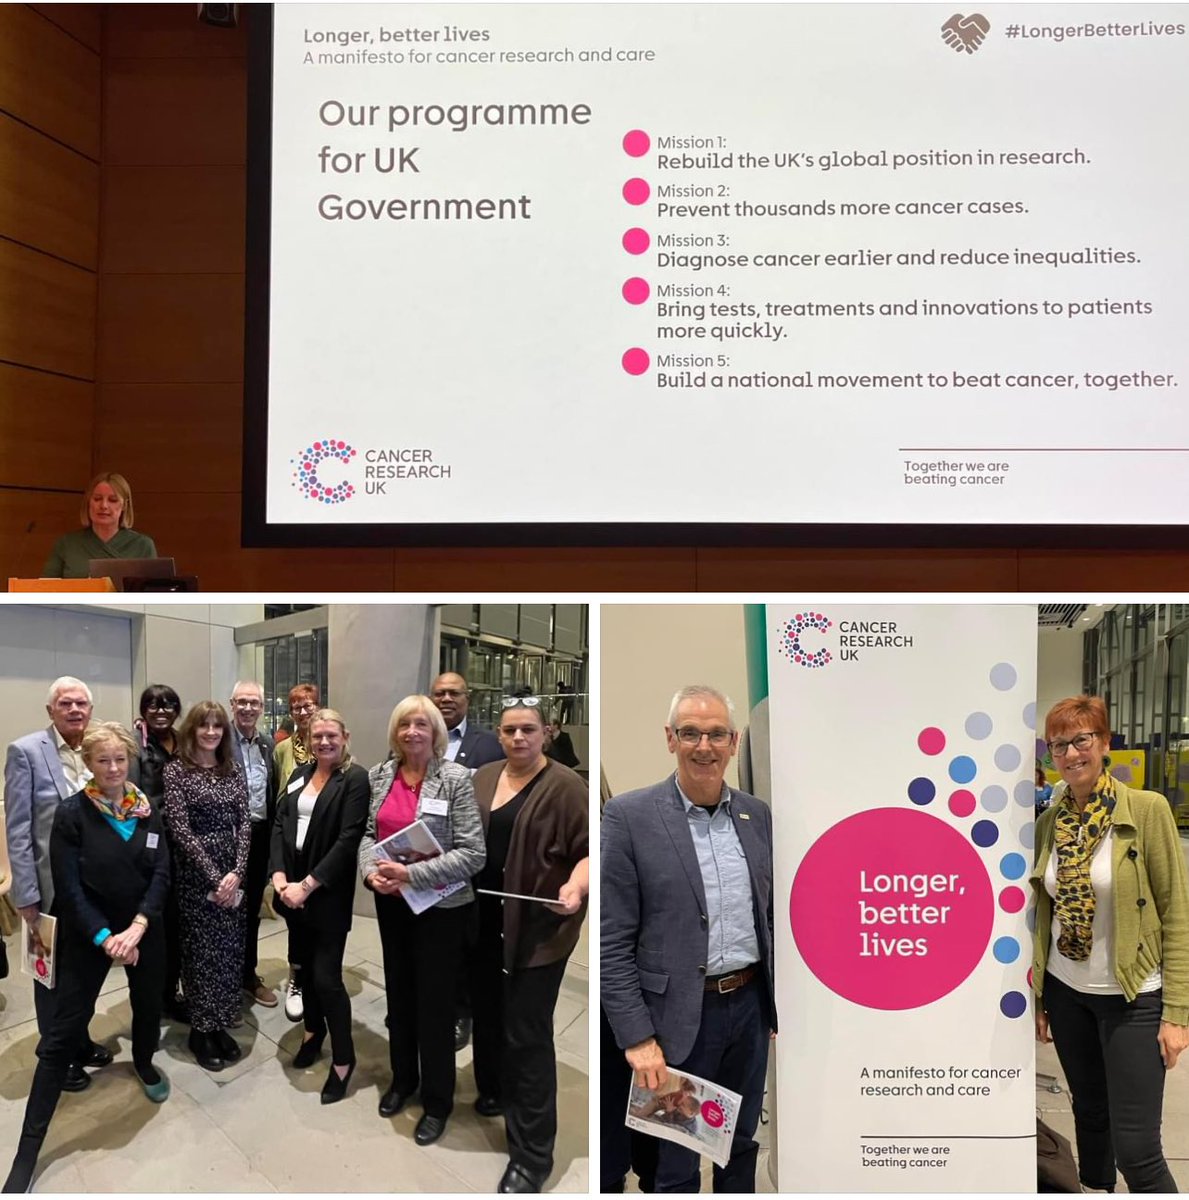 Proud to attend @CR_UK @CRUK_Policy launch of #CancerManifesto with @patrickjmcguire. People in the UK should have world leading and not world lagging cancer services so they can lead #LongerBetterLives. #ResearchIsWhereHopeStarts - we need to plug the research funding gap